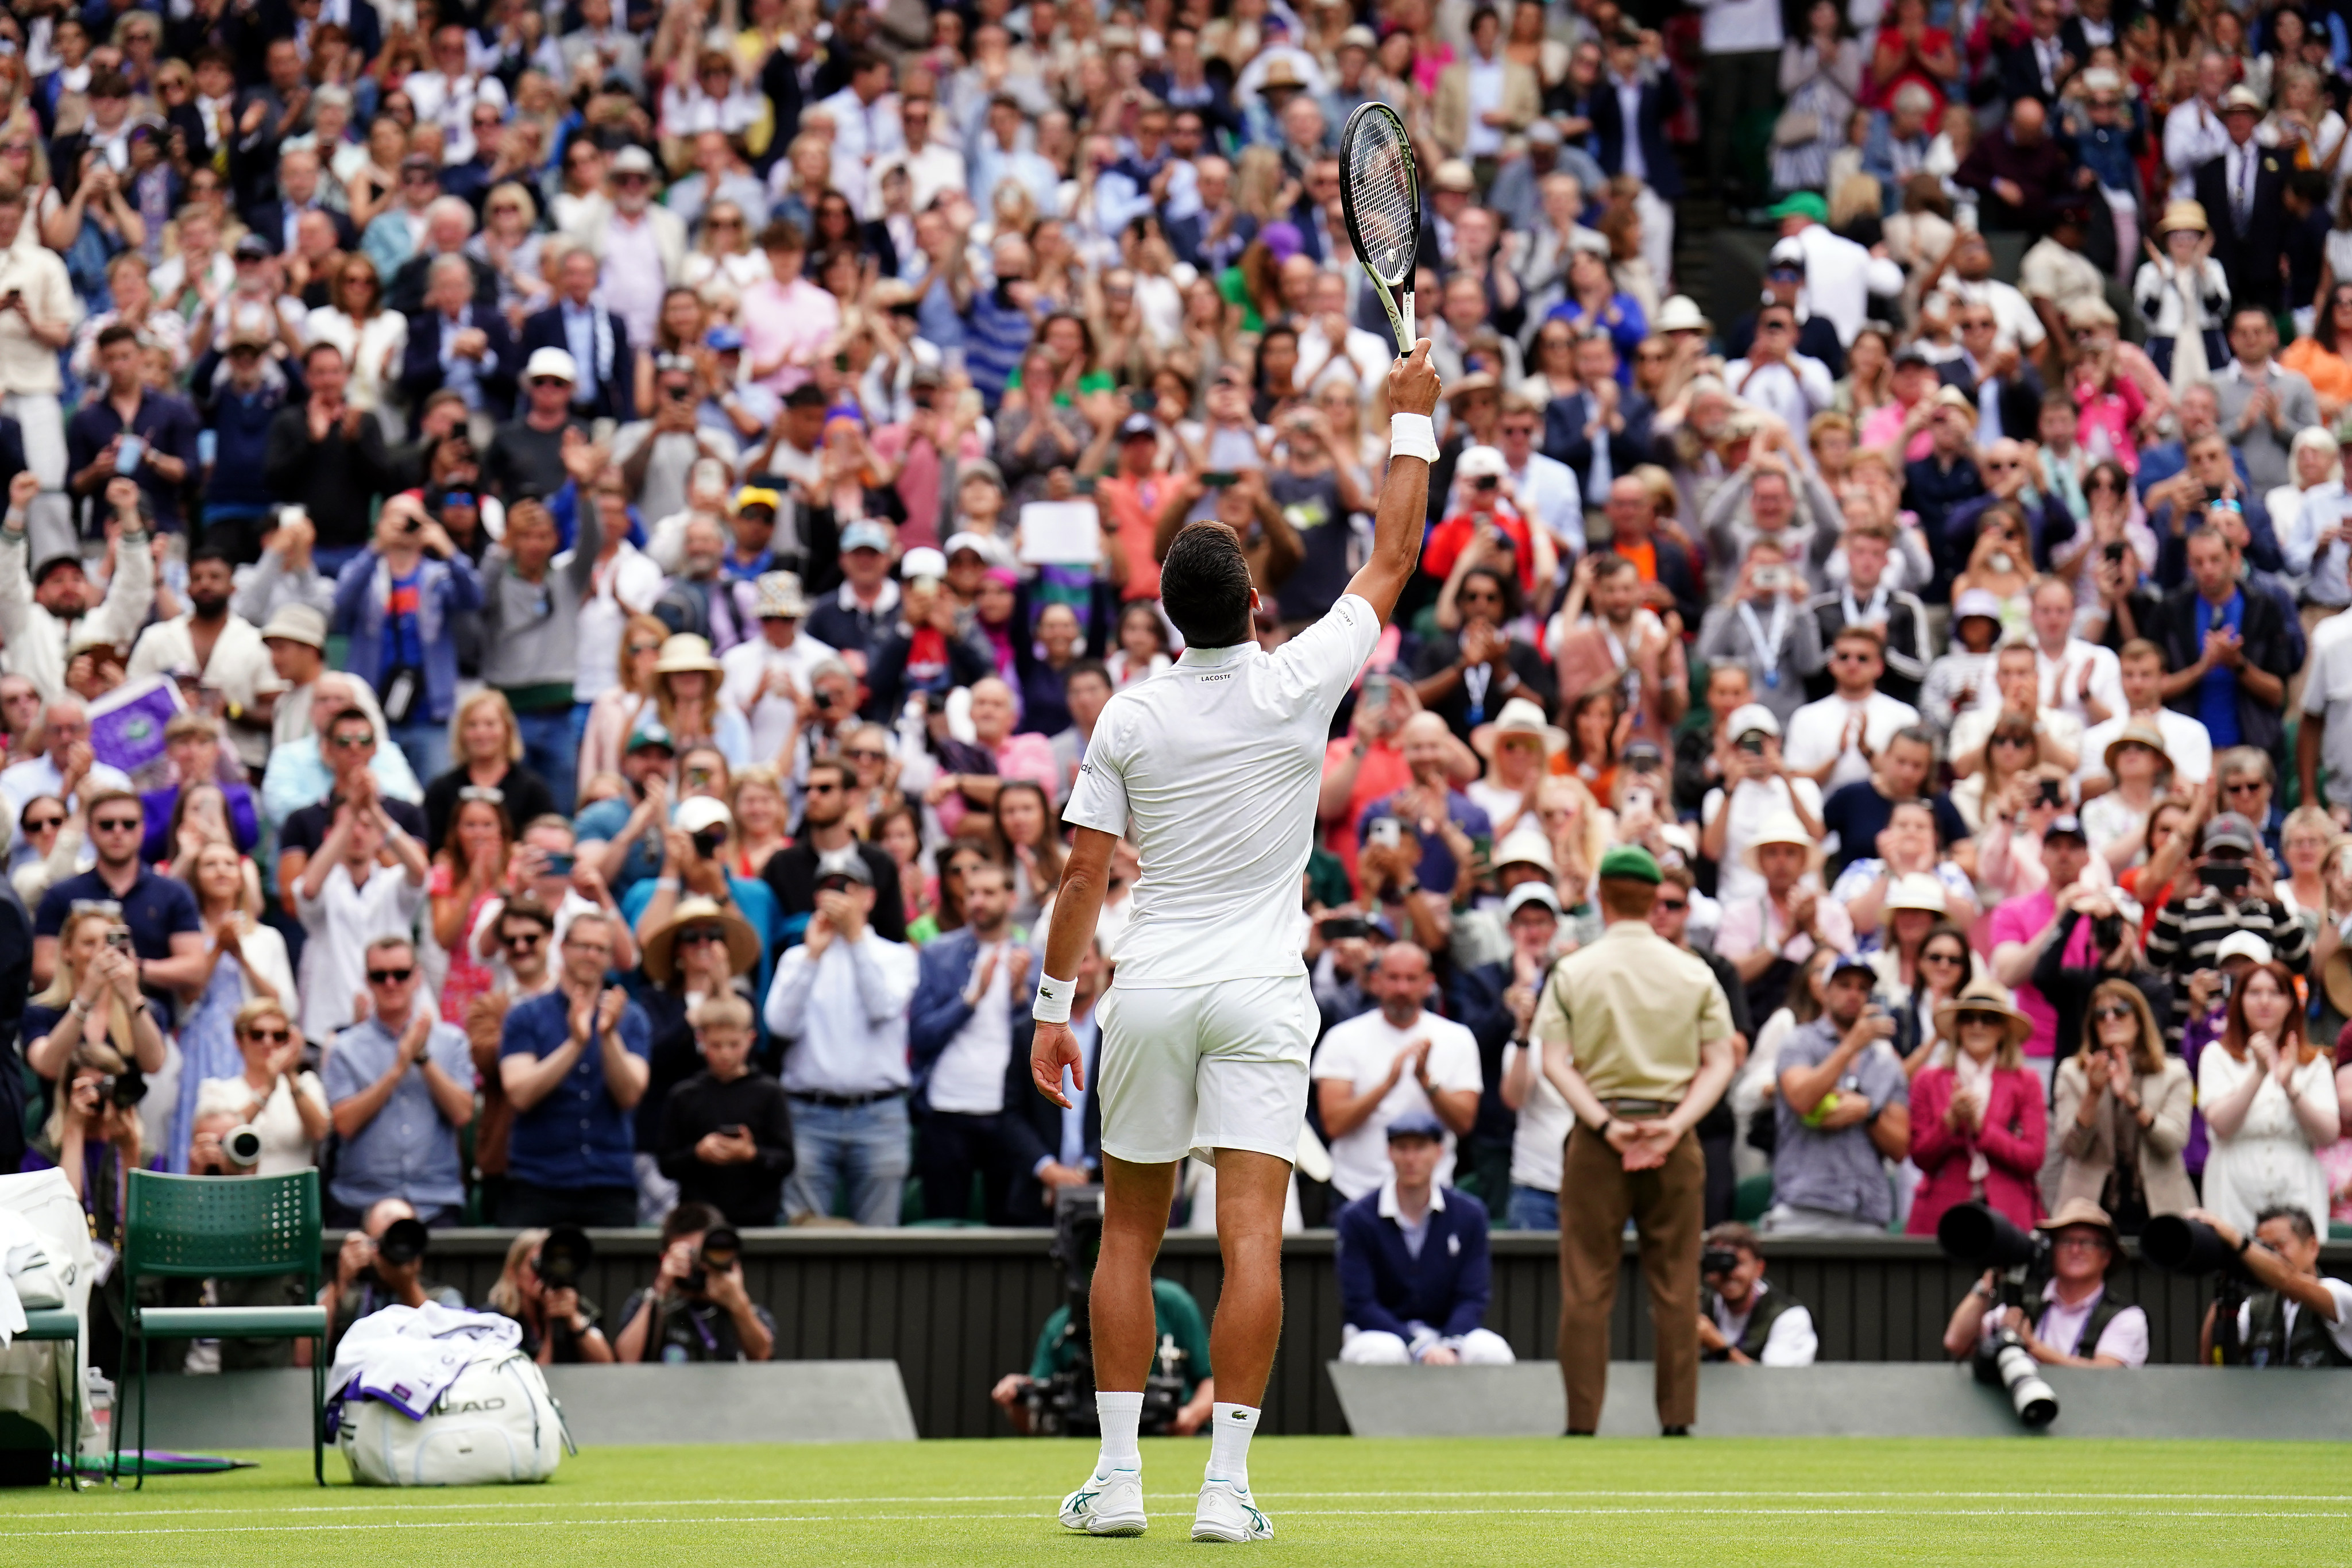 Novak Djokovic acknowledges the crowd after beating Pedro Cachin in the first round of the men’s singles at Wimbledon. Photo: DPA